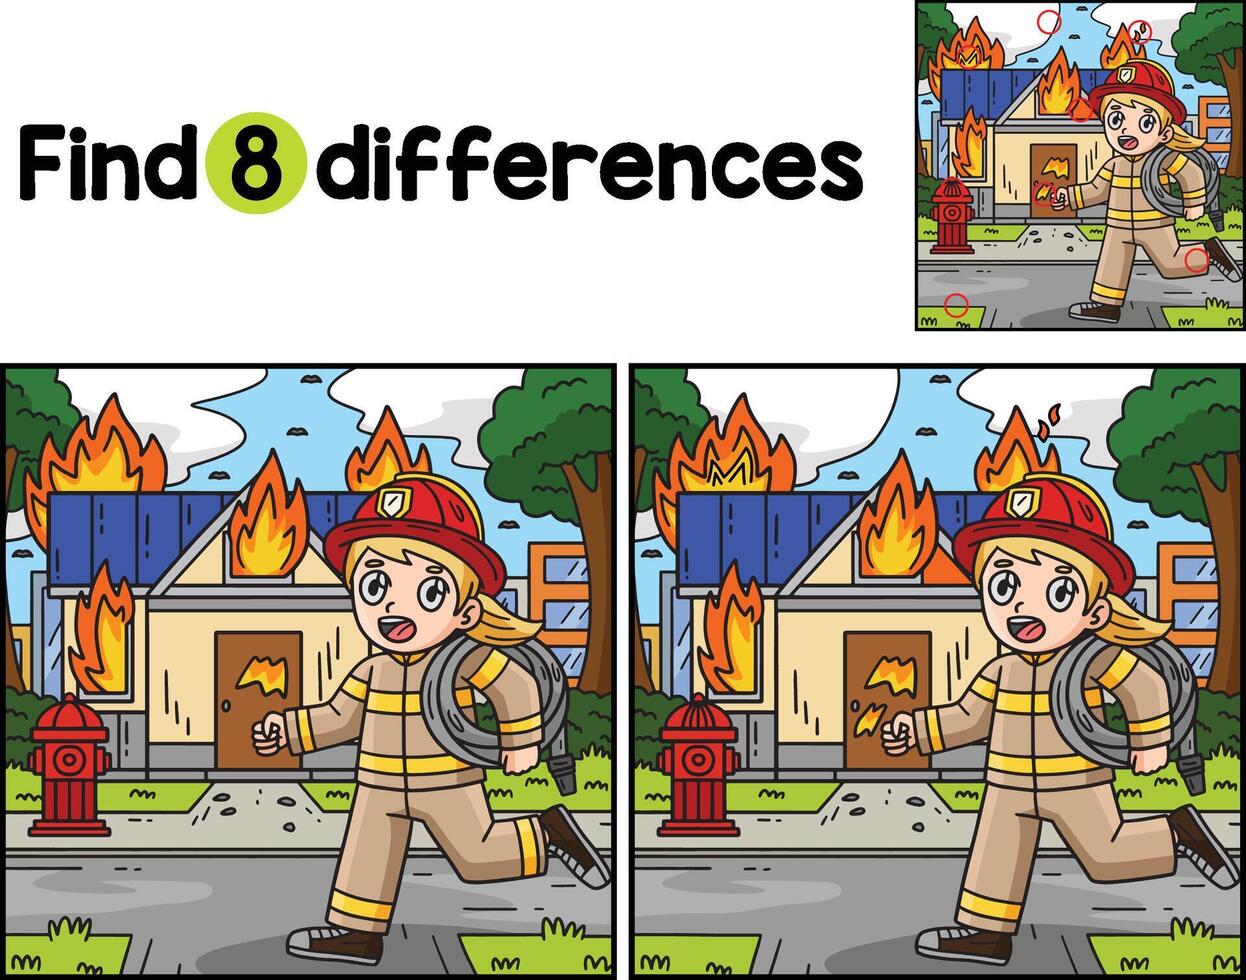 Firefighter Building on Fire Find The Differences vector